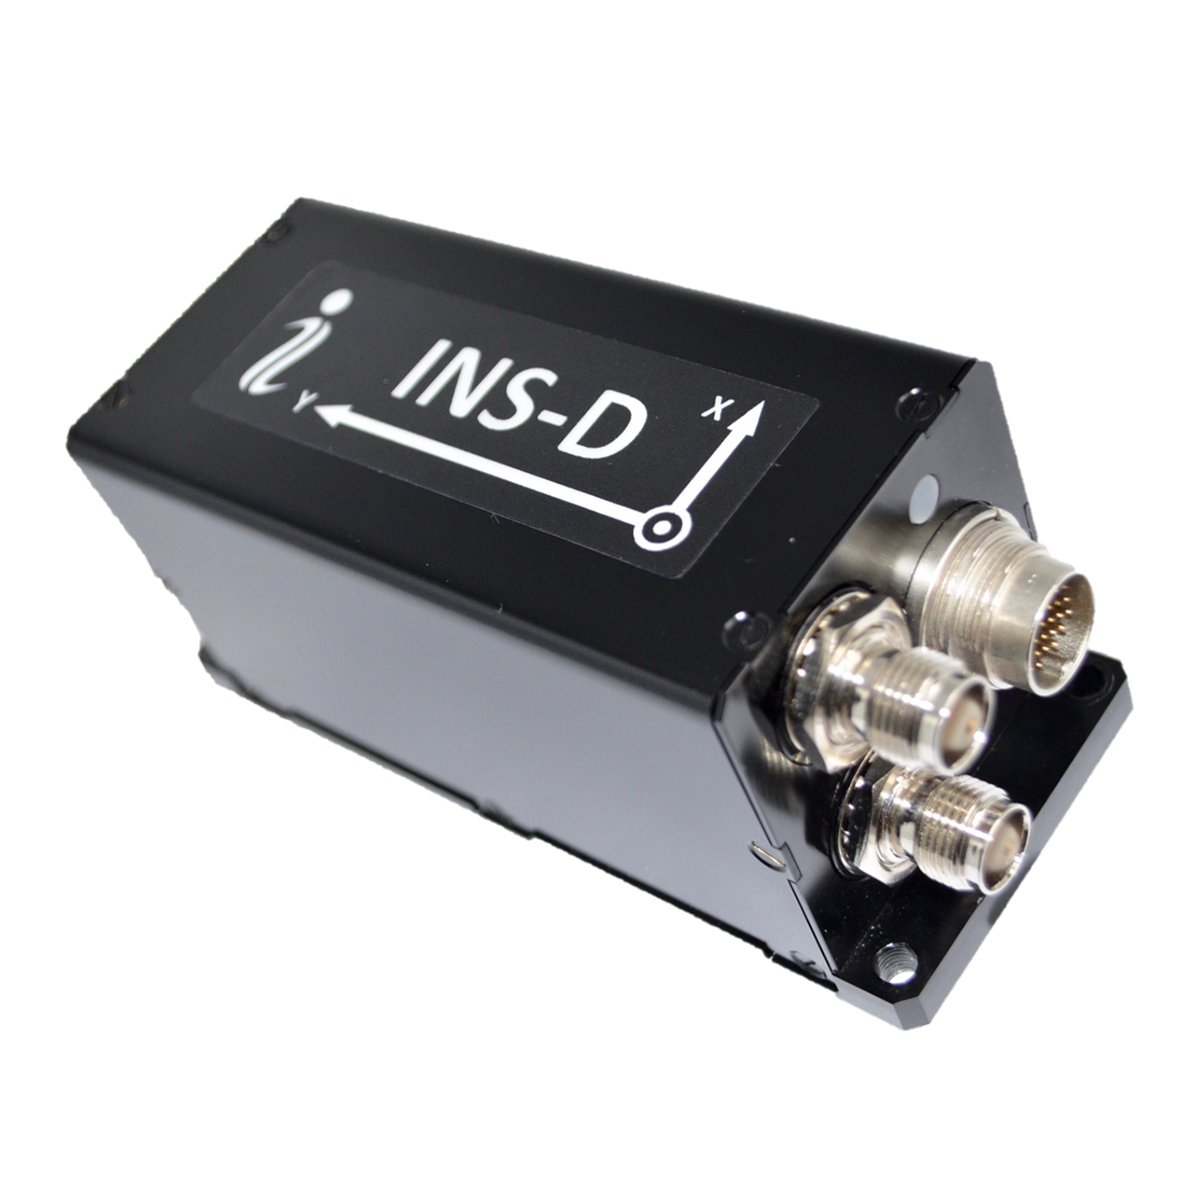 INS-D - Dual Antenna GPS-Aided Inertial Navigation System